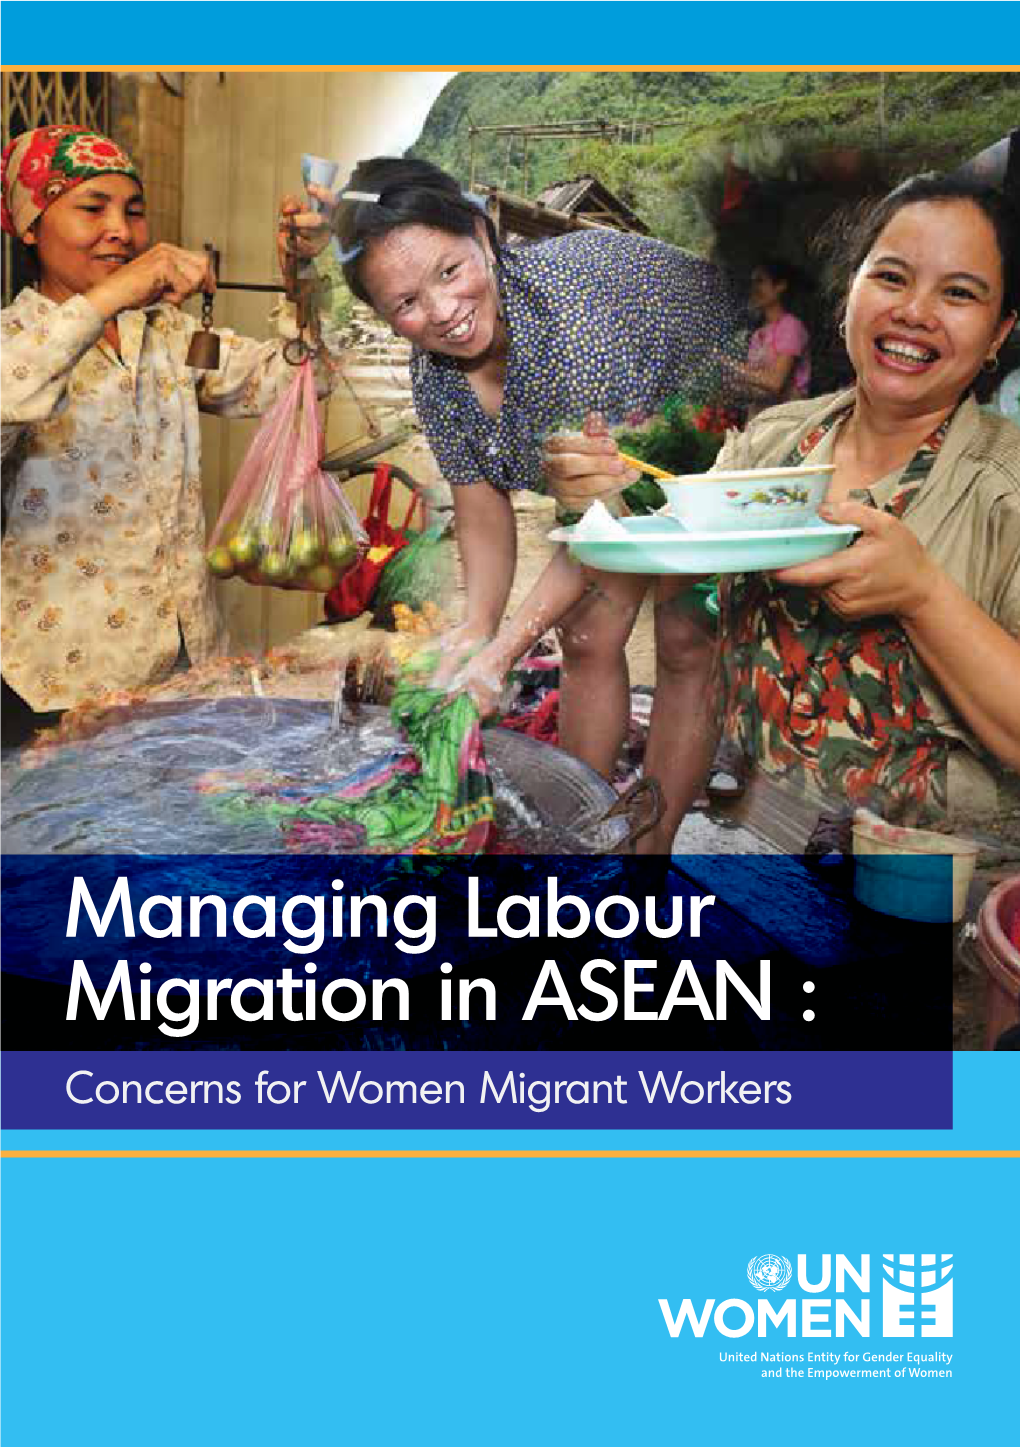 Managing Labour Migration in ASEAN : Concerns for Women Migrant Workers UN Women Is the UN Organization Dedicated to Gender Equality and the Empowerment of Women